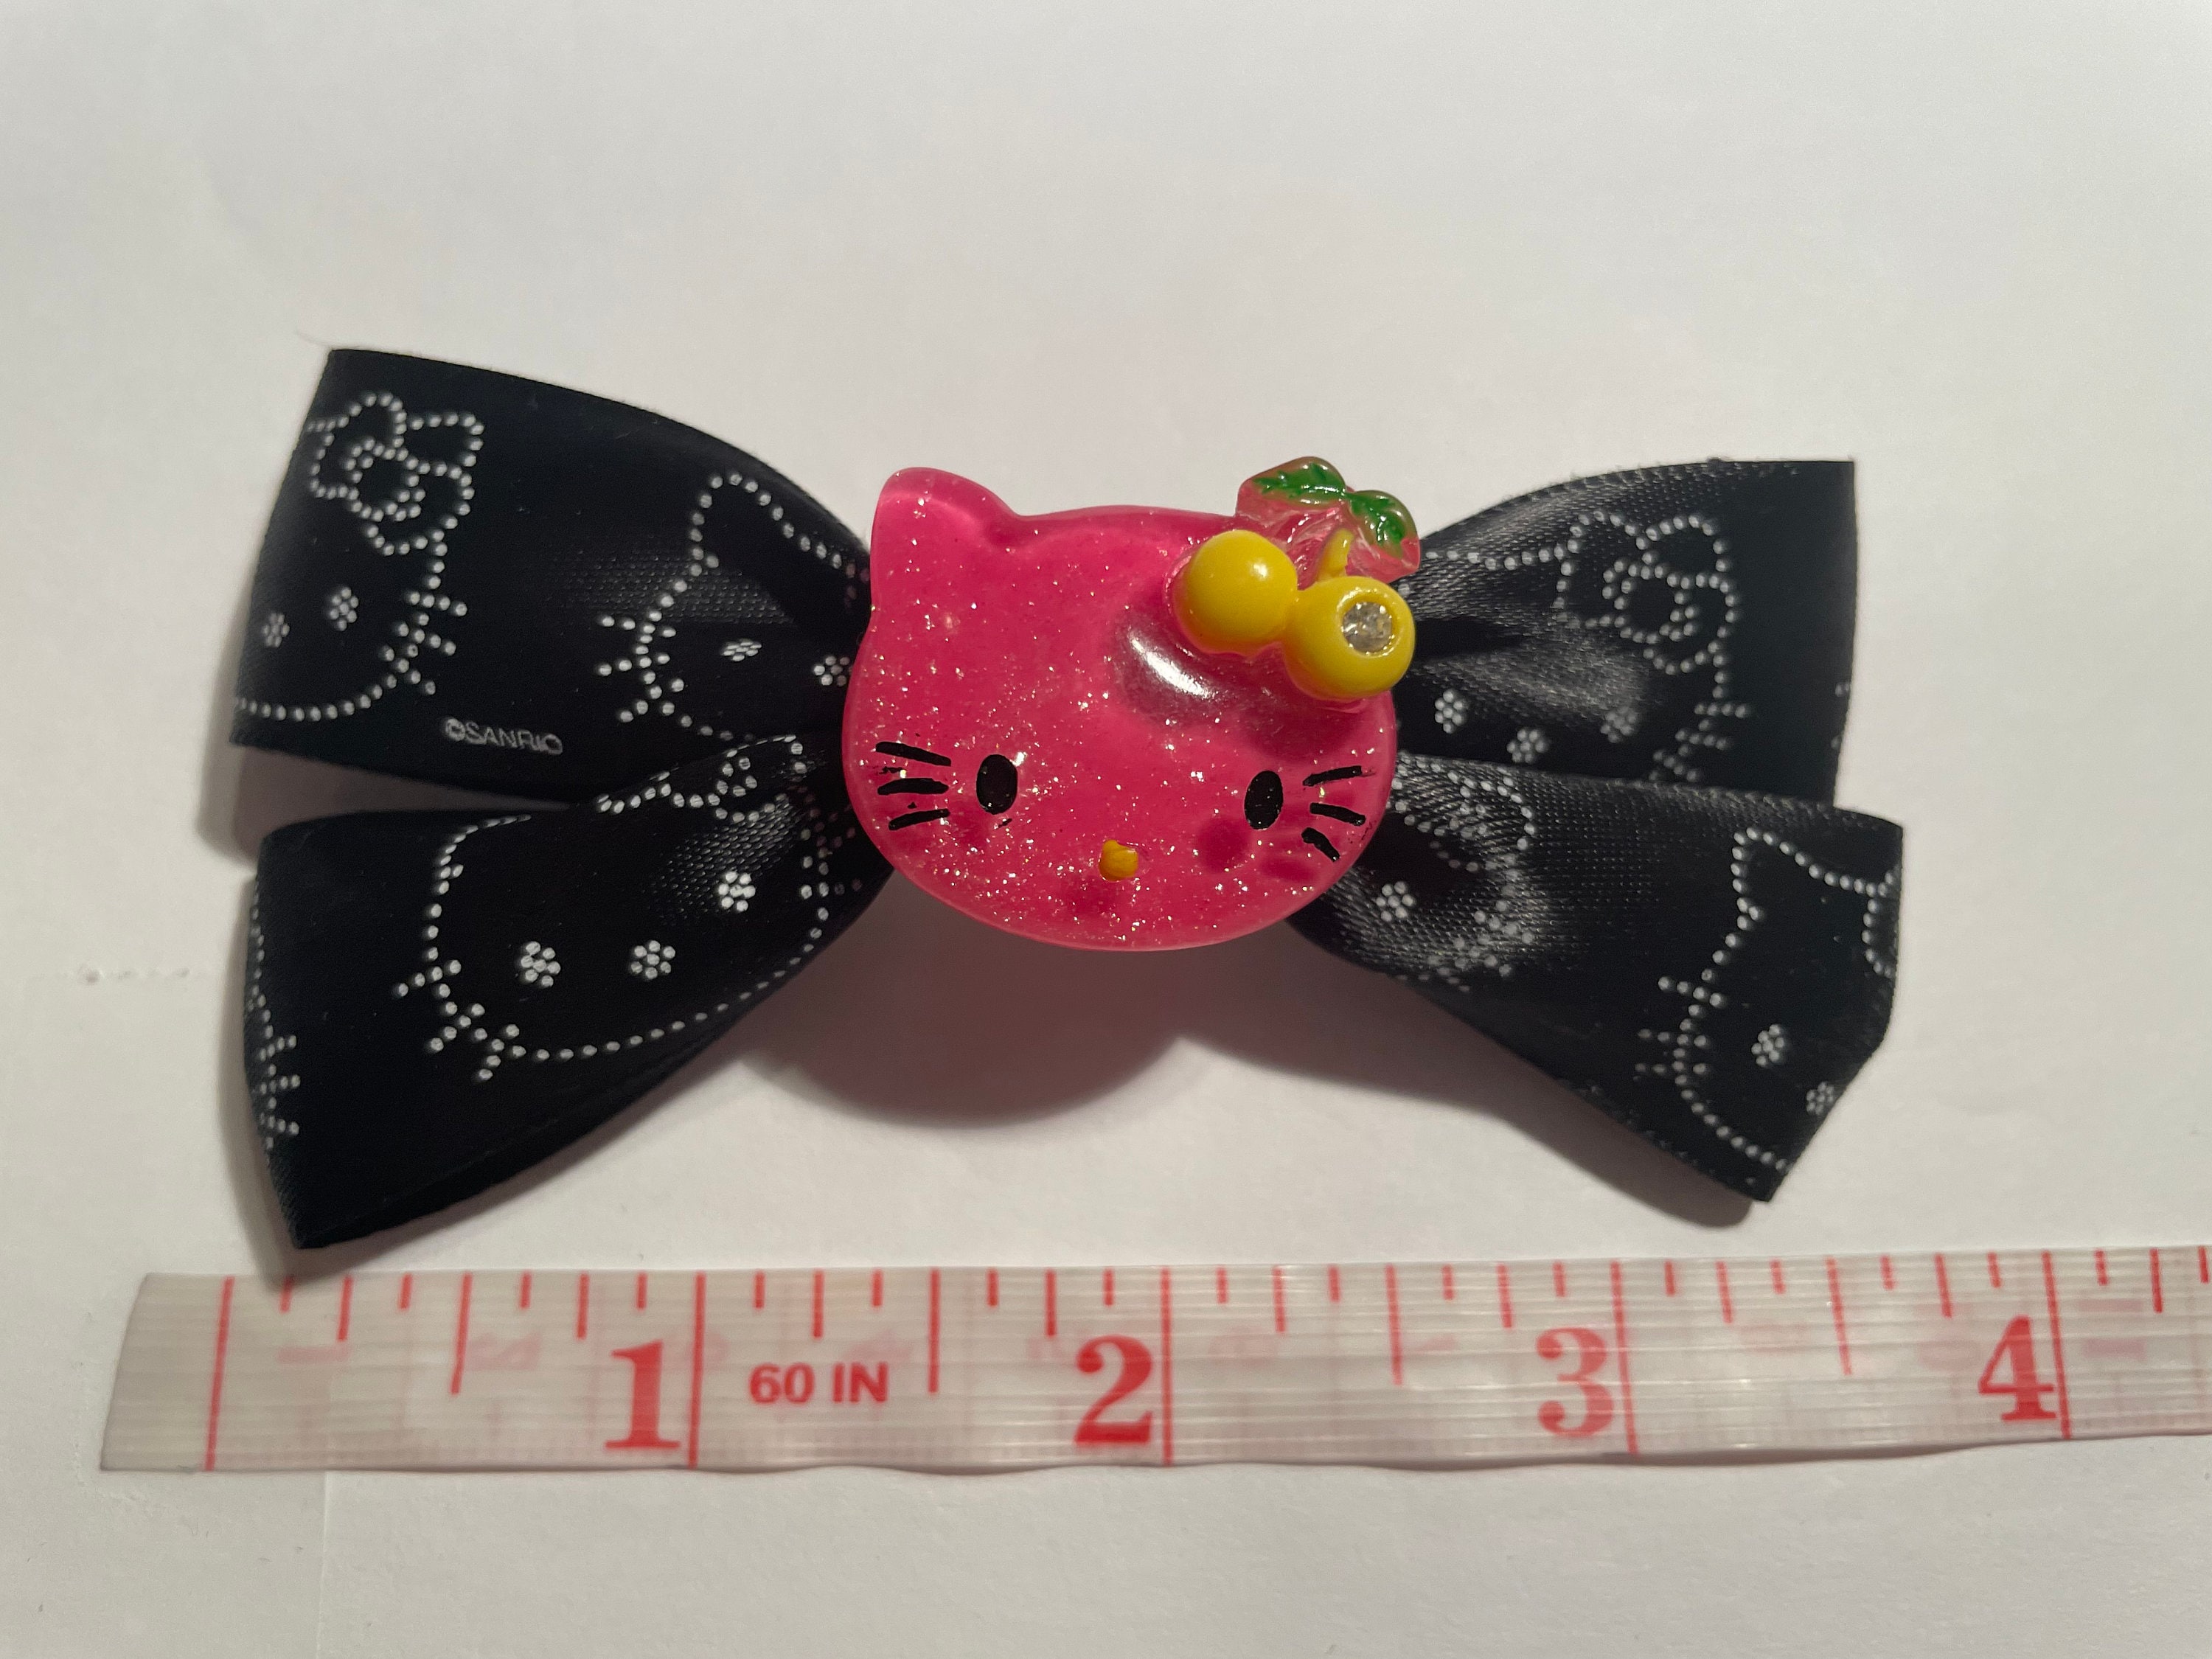 Girls Hair Bow 3 1/2" Wide Flower Hello Kitty Pink/Black/White French Barrette 